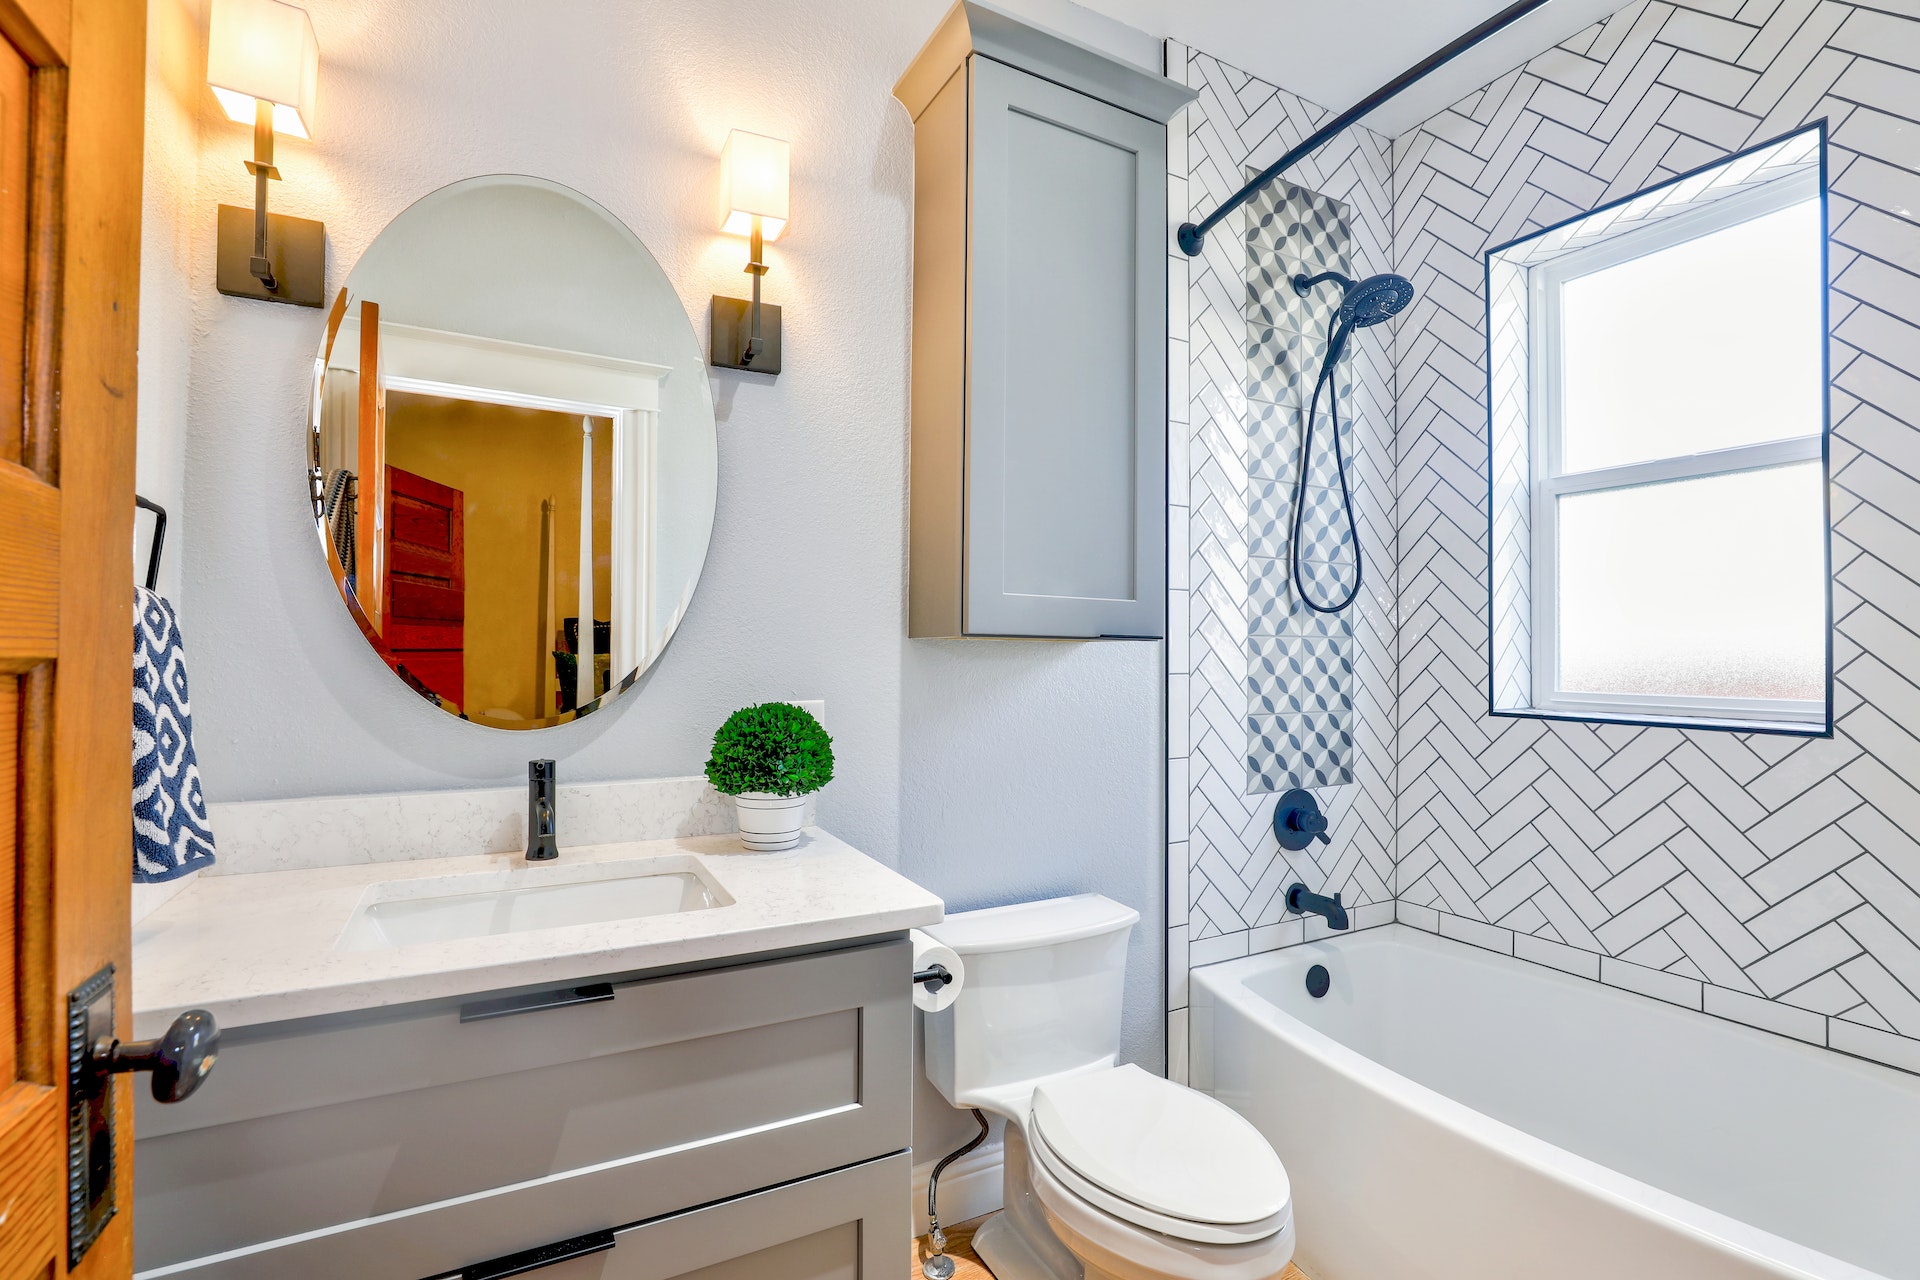 Why Should You Opt For Bathroom Fitters Instead Of DIY?